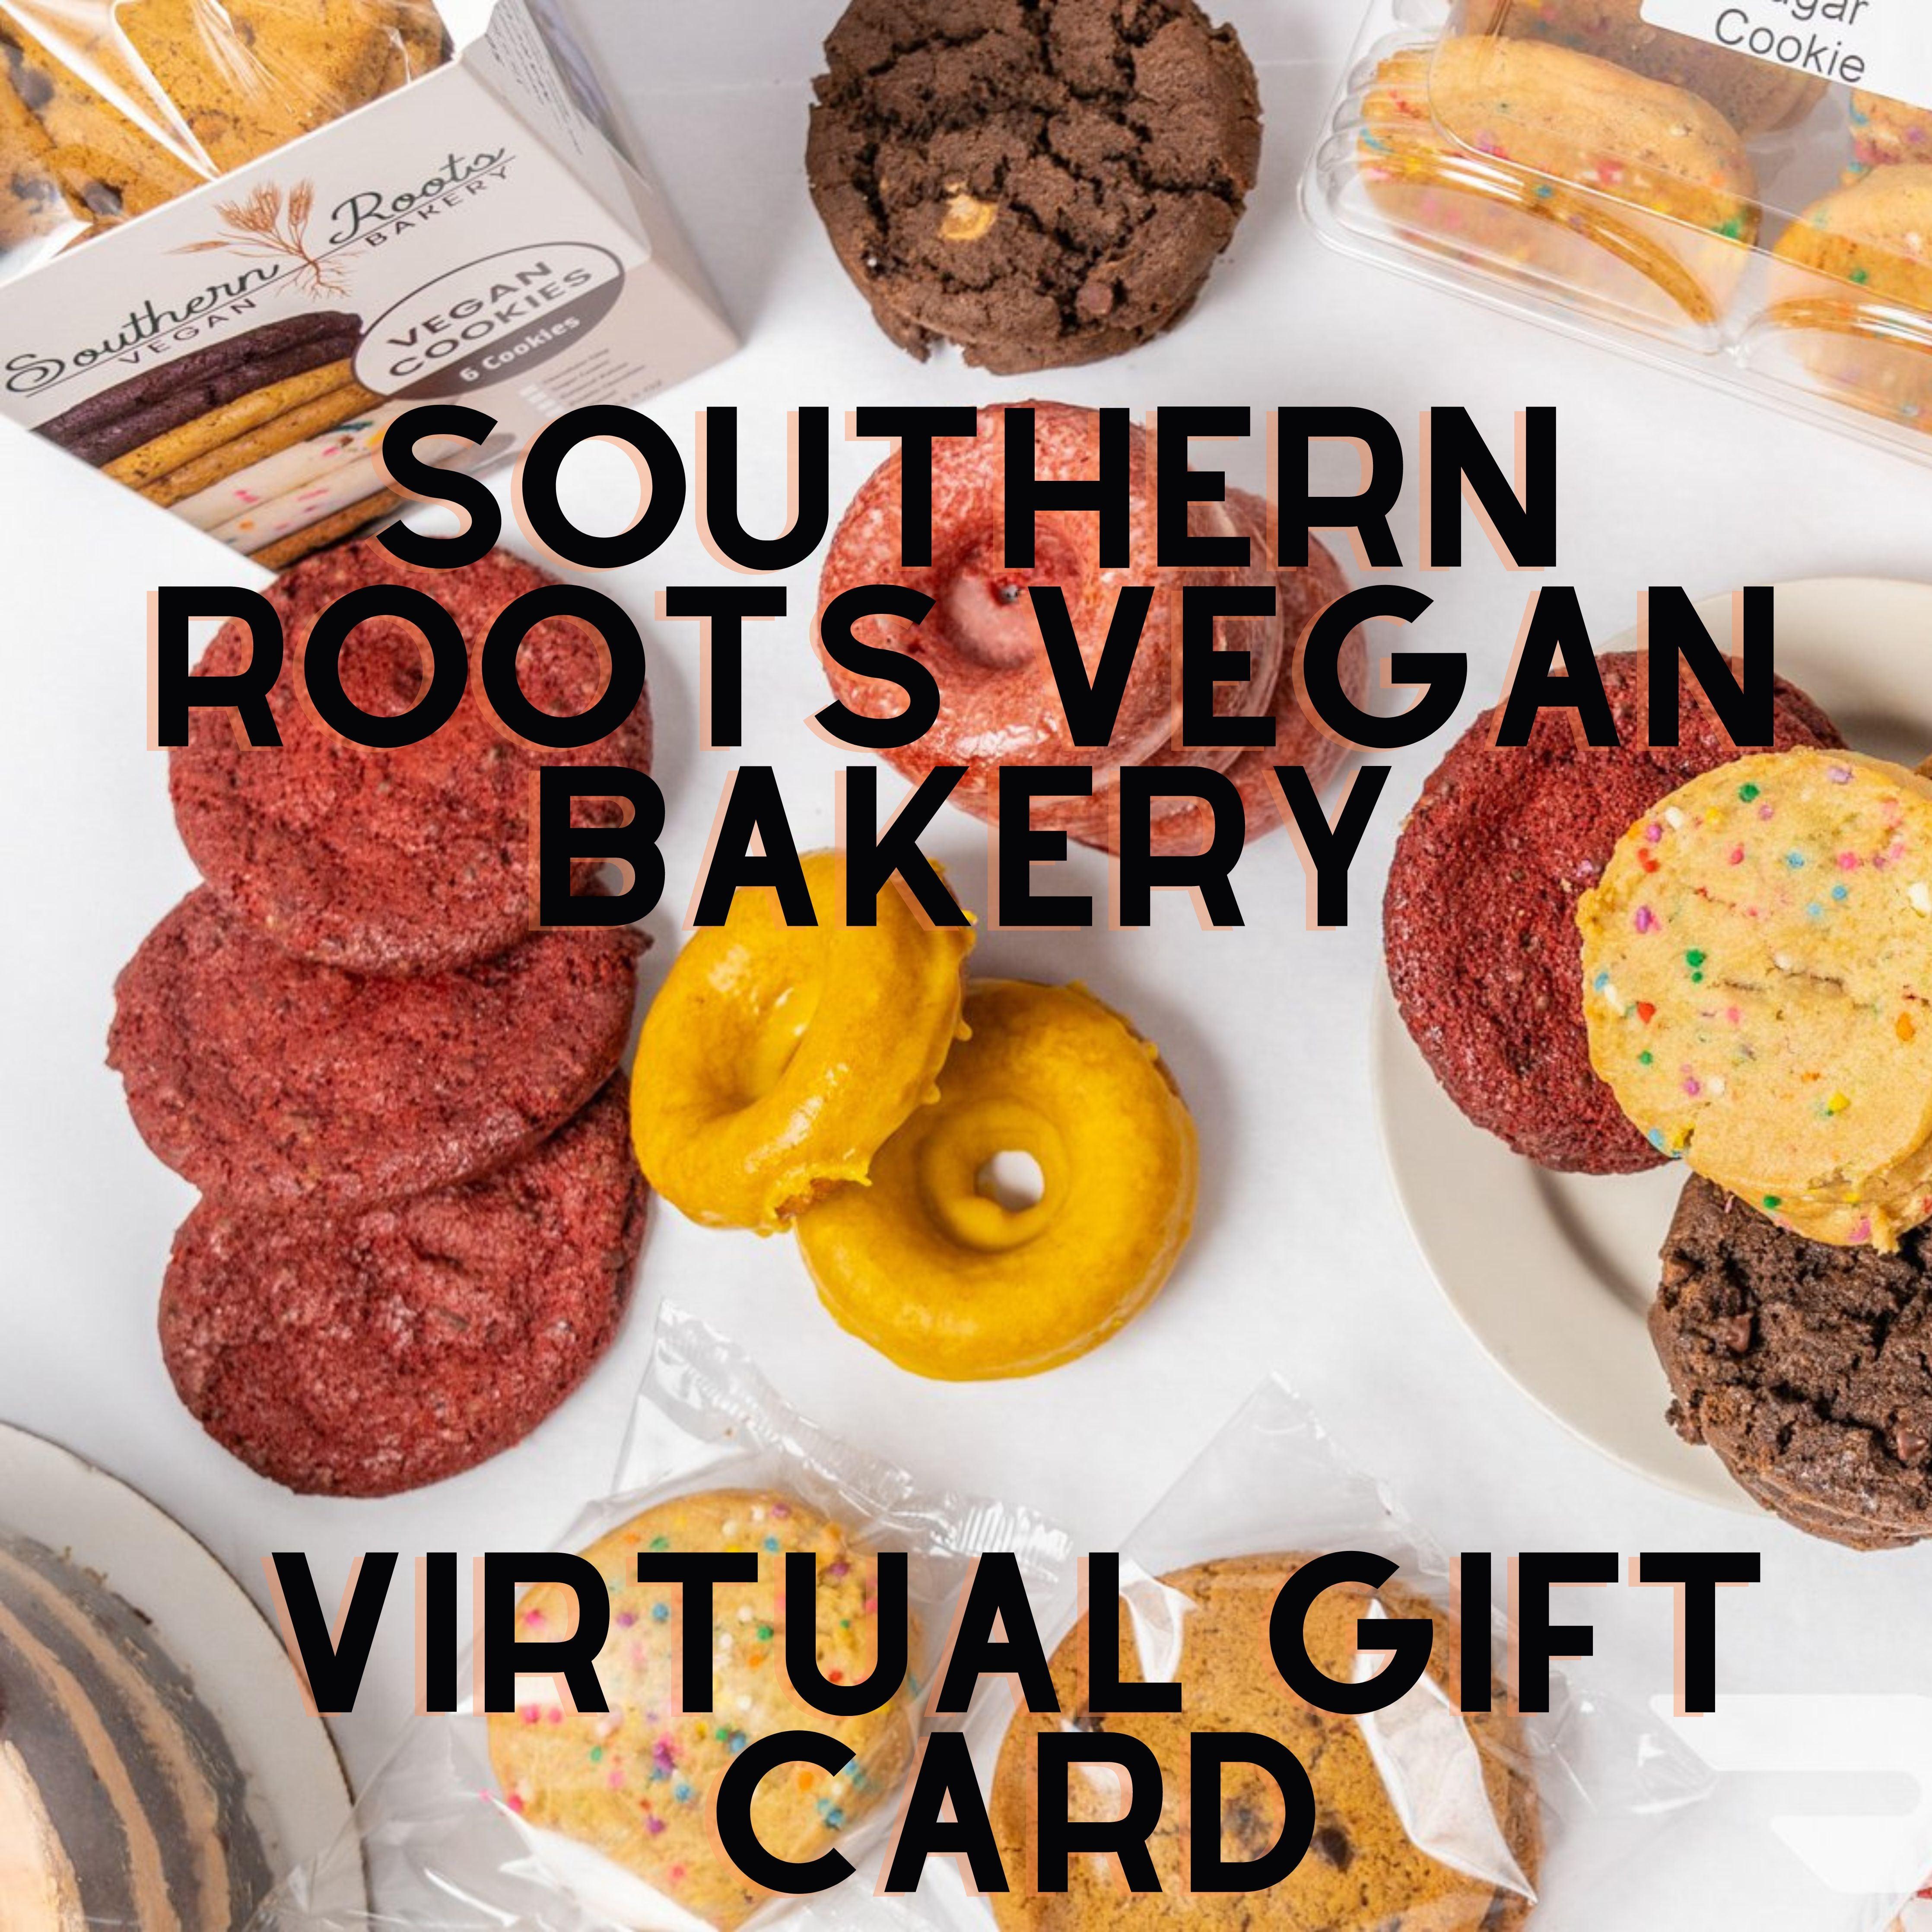 Southern Roots Virtual Gift Card - Southern Roots Vegan Bakery